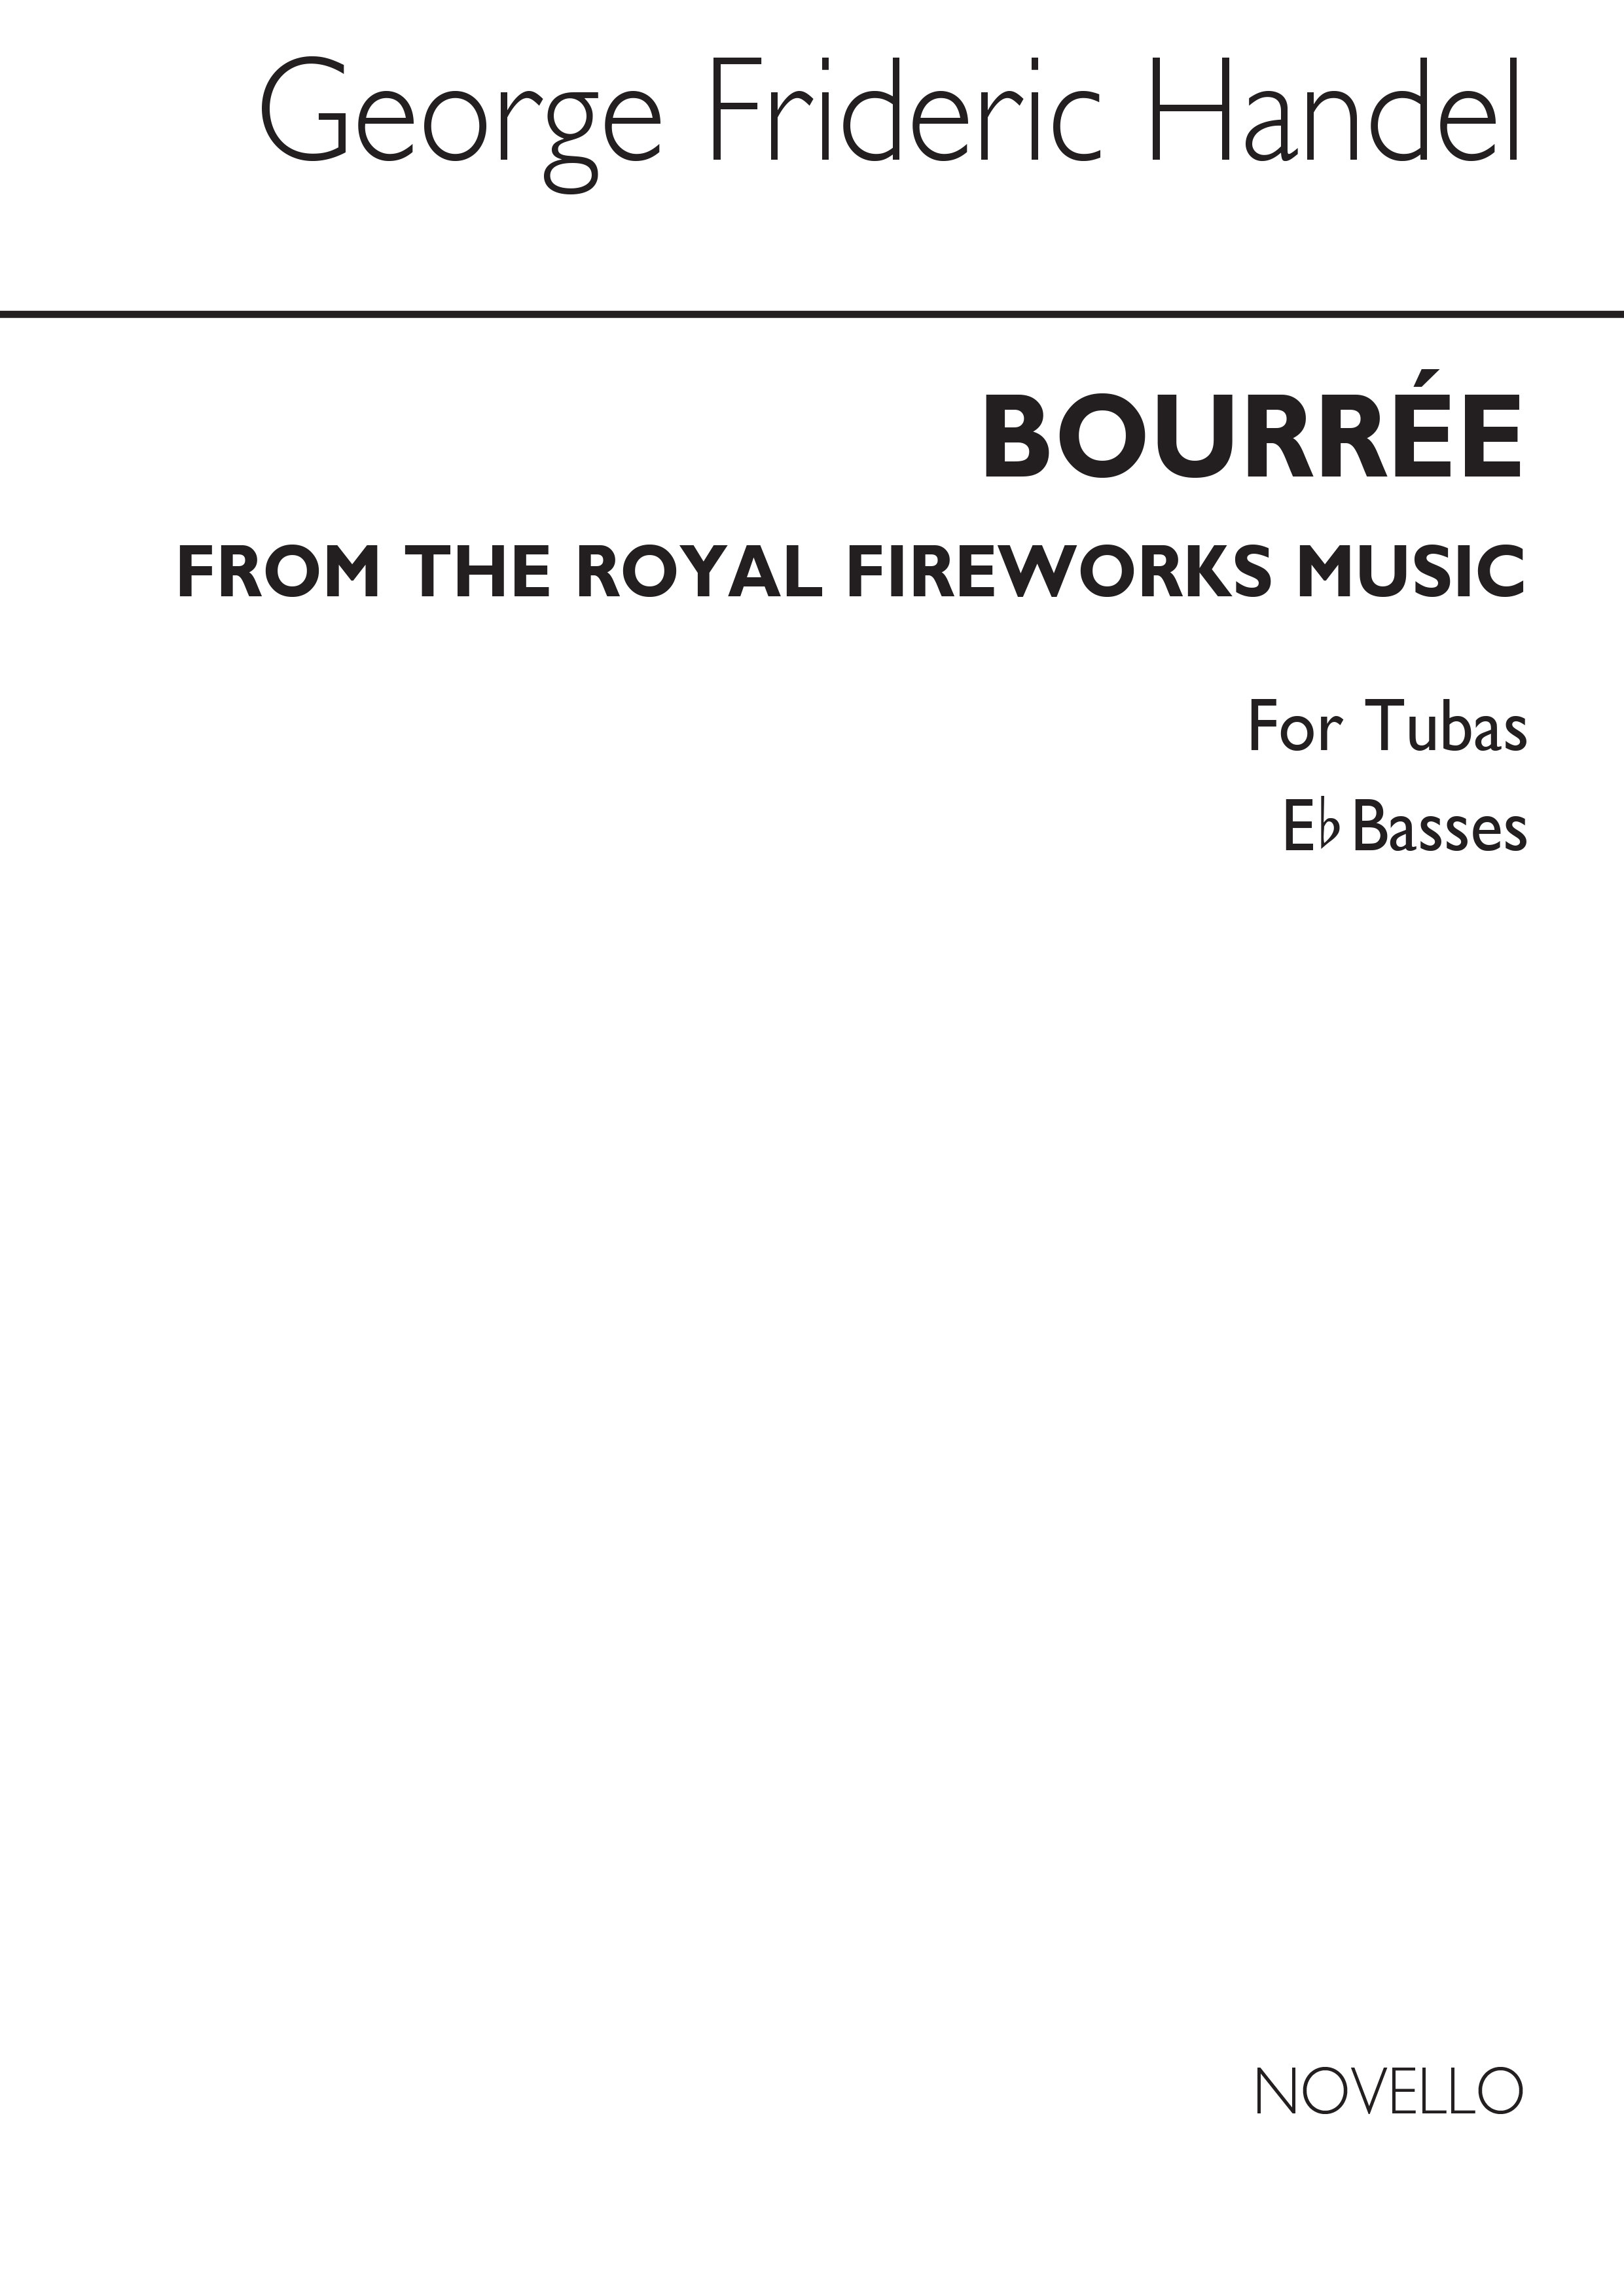 George Frideric Handel: Bourree From The Fireworks Music (Bc Bass/Tuba In Eb)